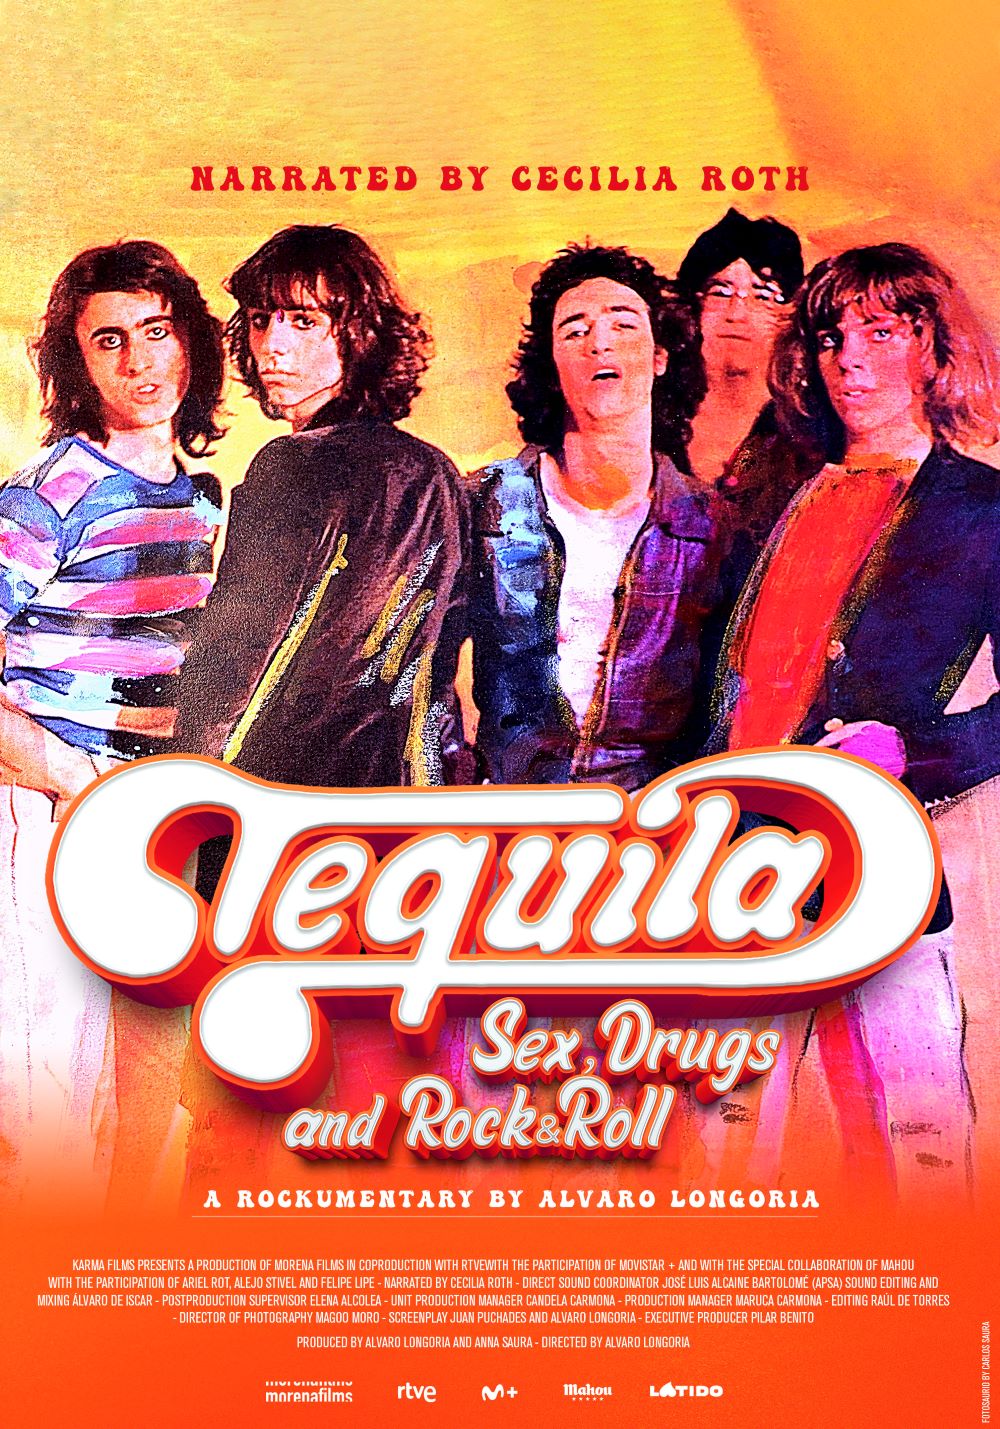 TEQUILA. SEX, DRUGS AND ROCK & ROLL